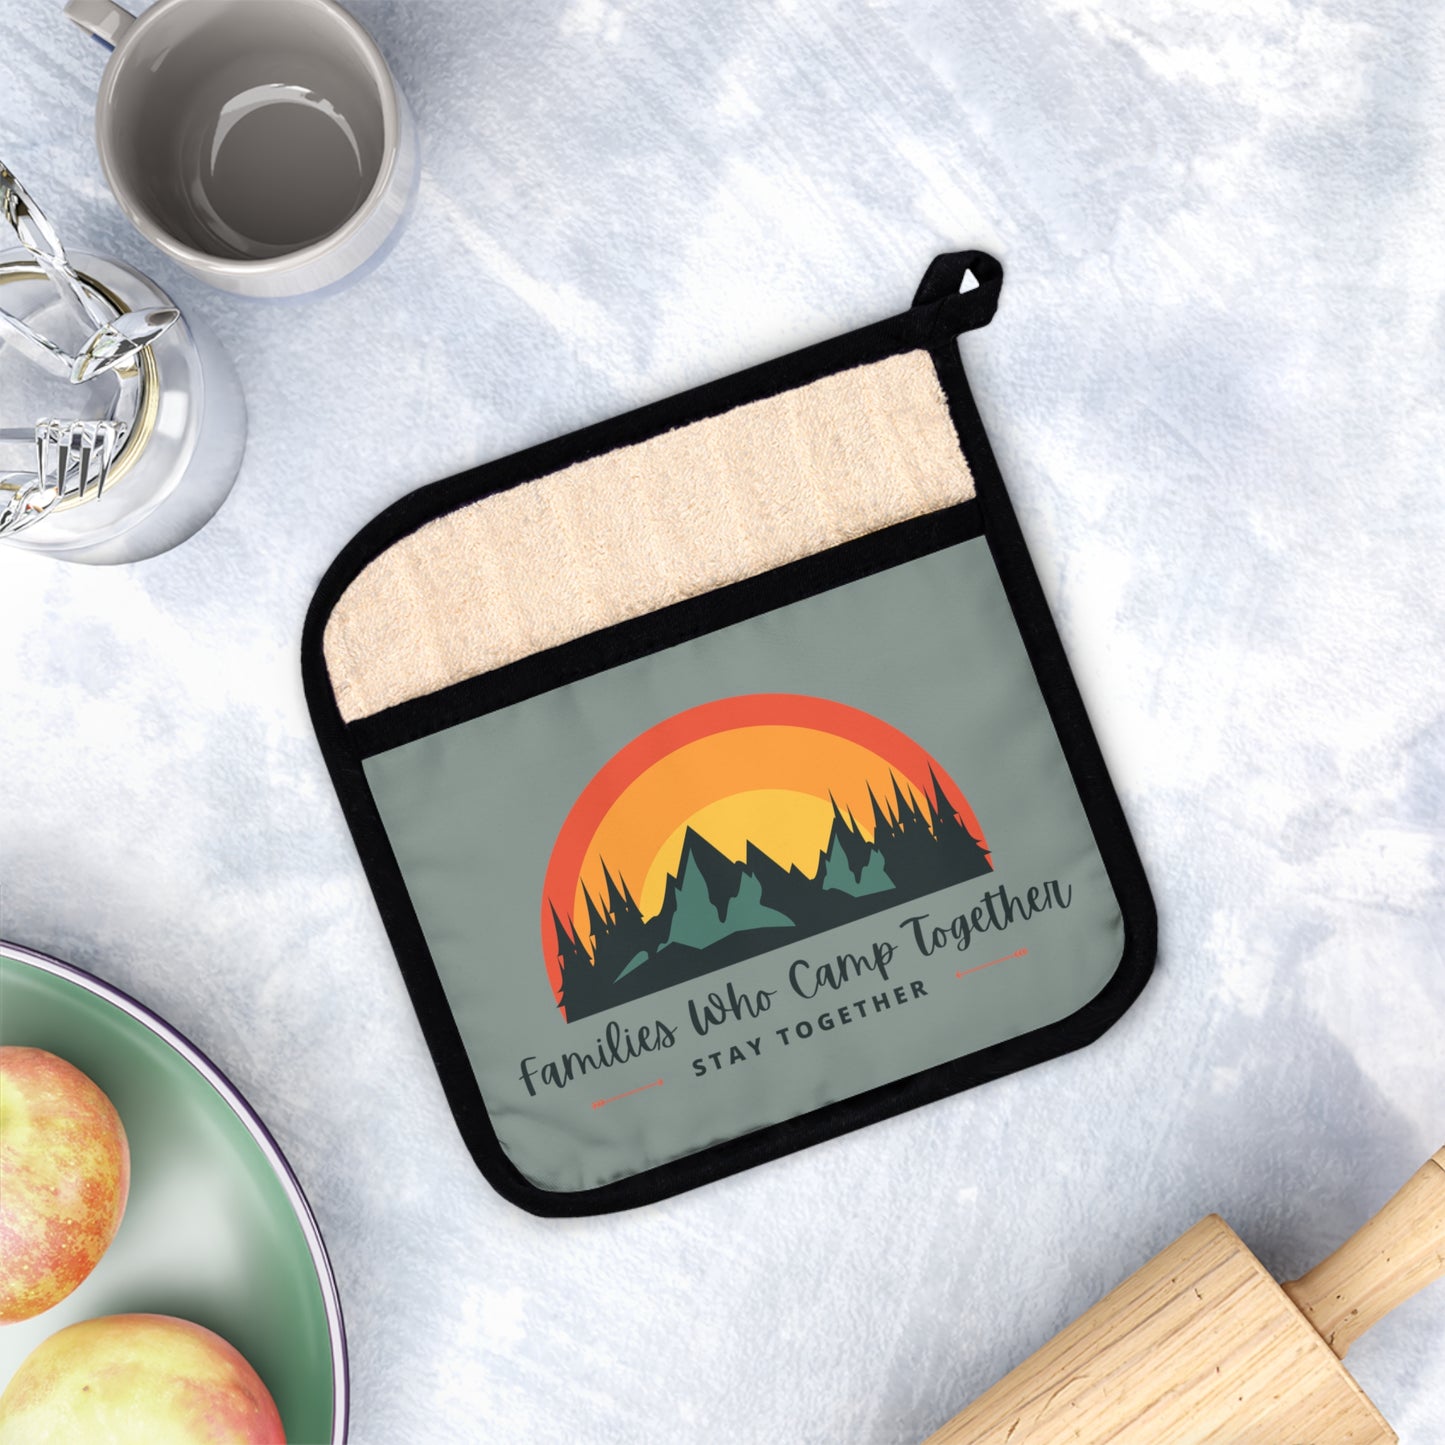 CAMPING FAMILIES STAY TOGETHER Pot Holder with Pocket